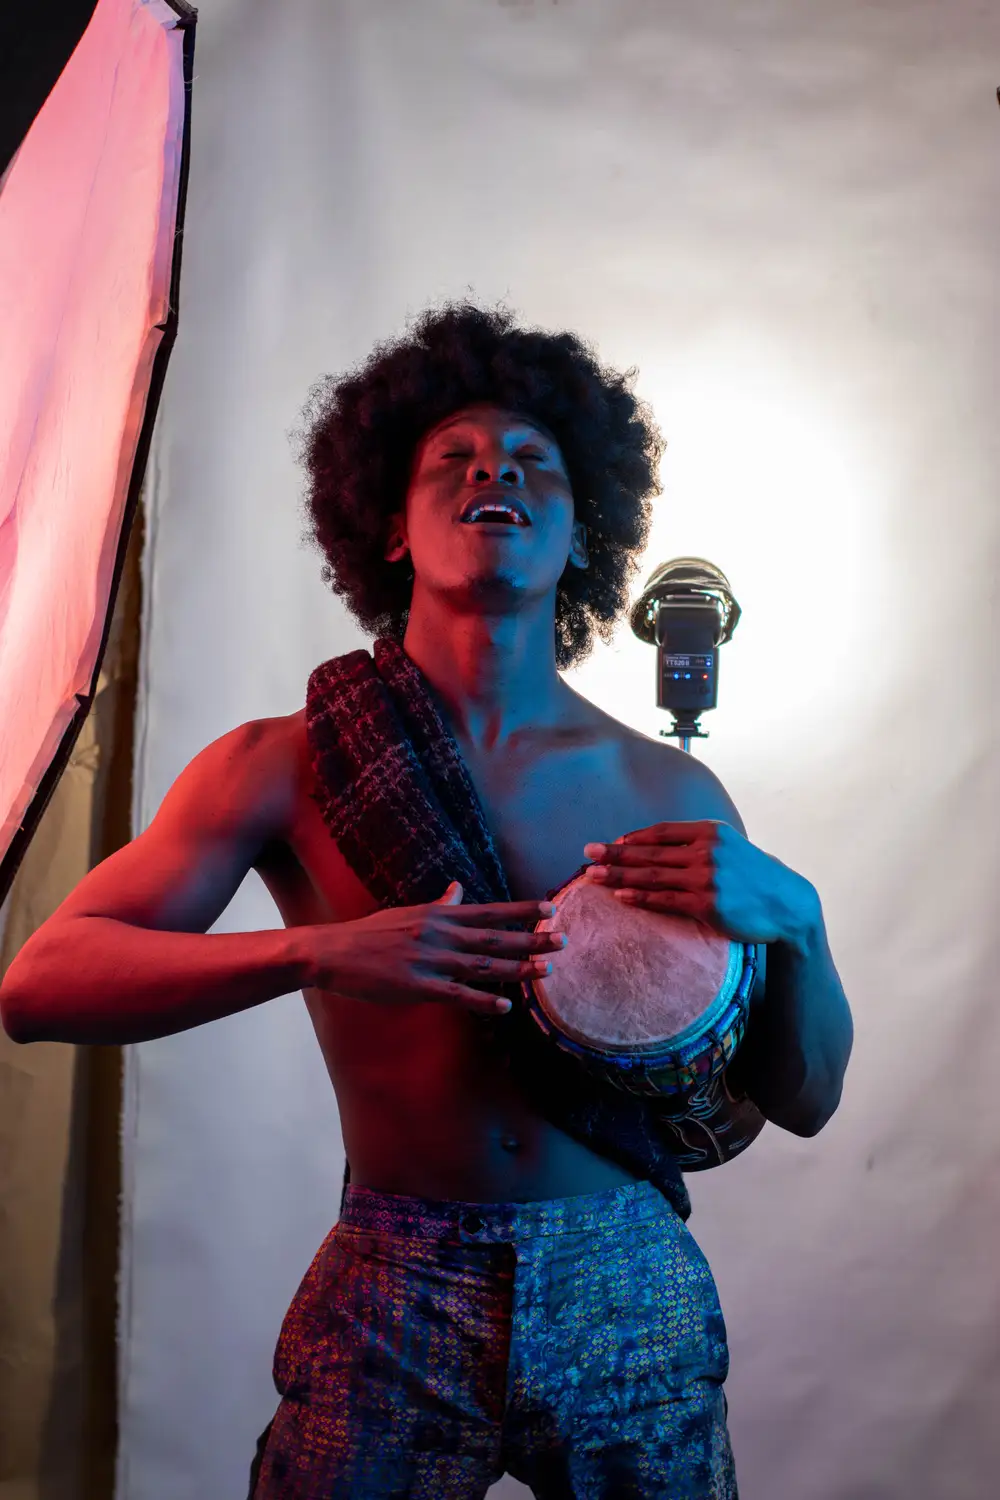 model on afro hairstyle plays drum 3